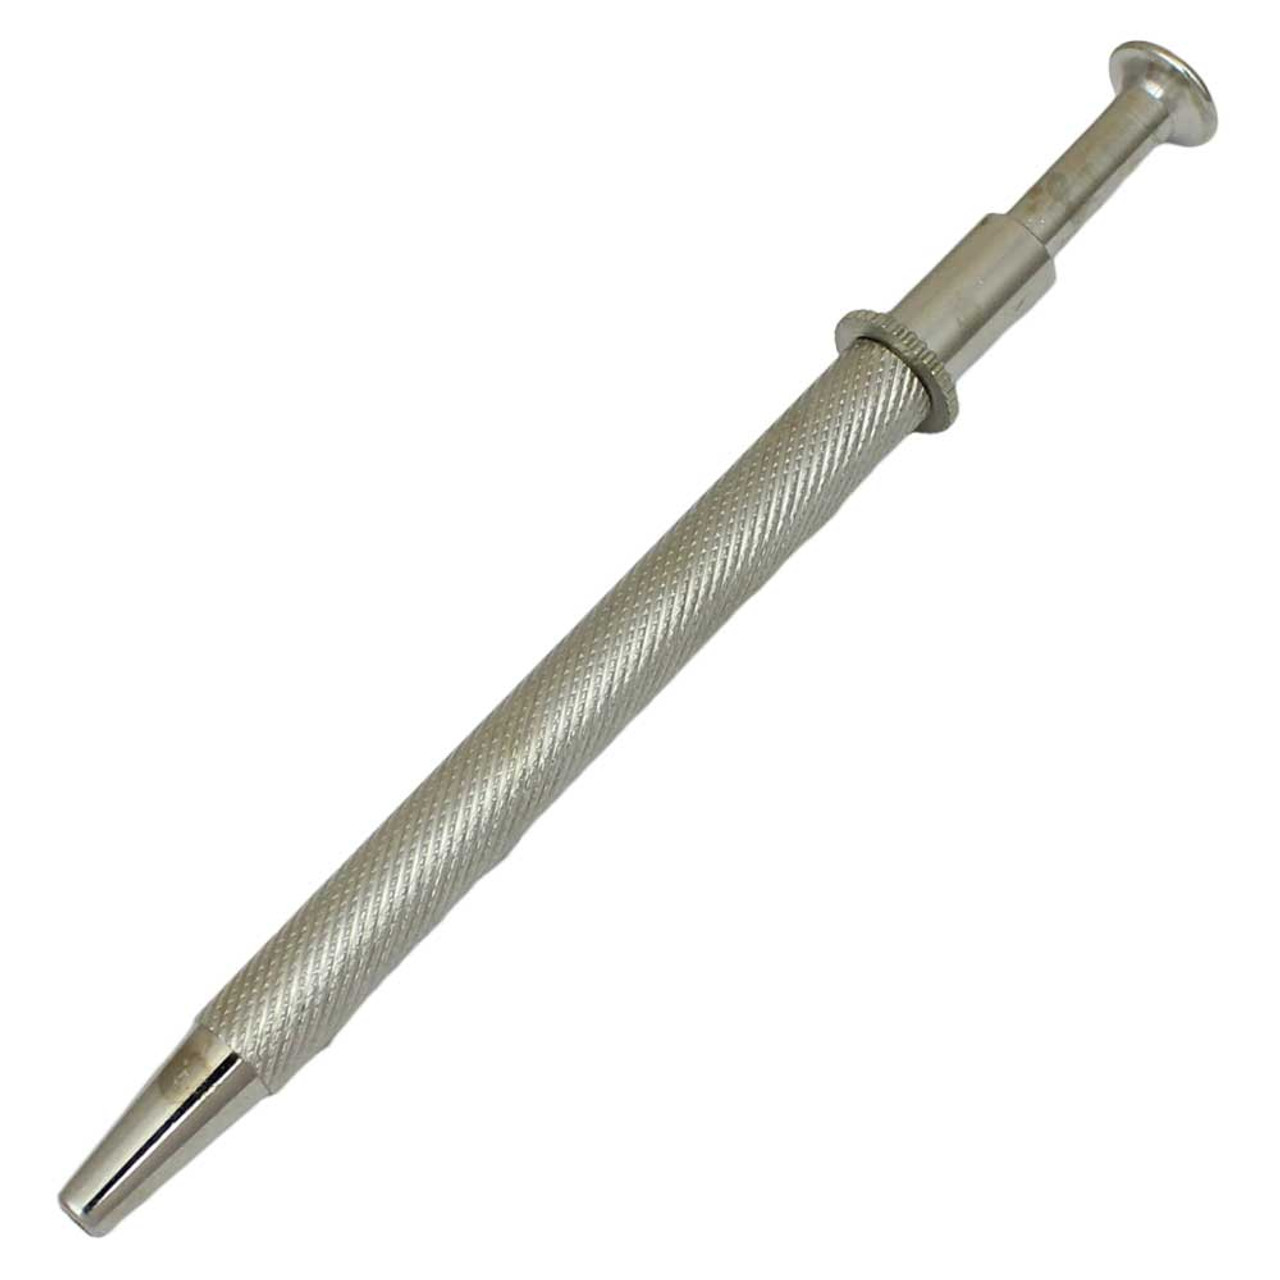 Stone Holder 4 Prong 5 Inch